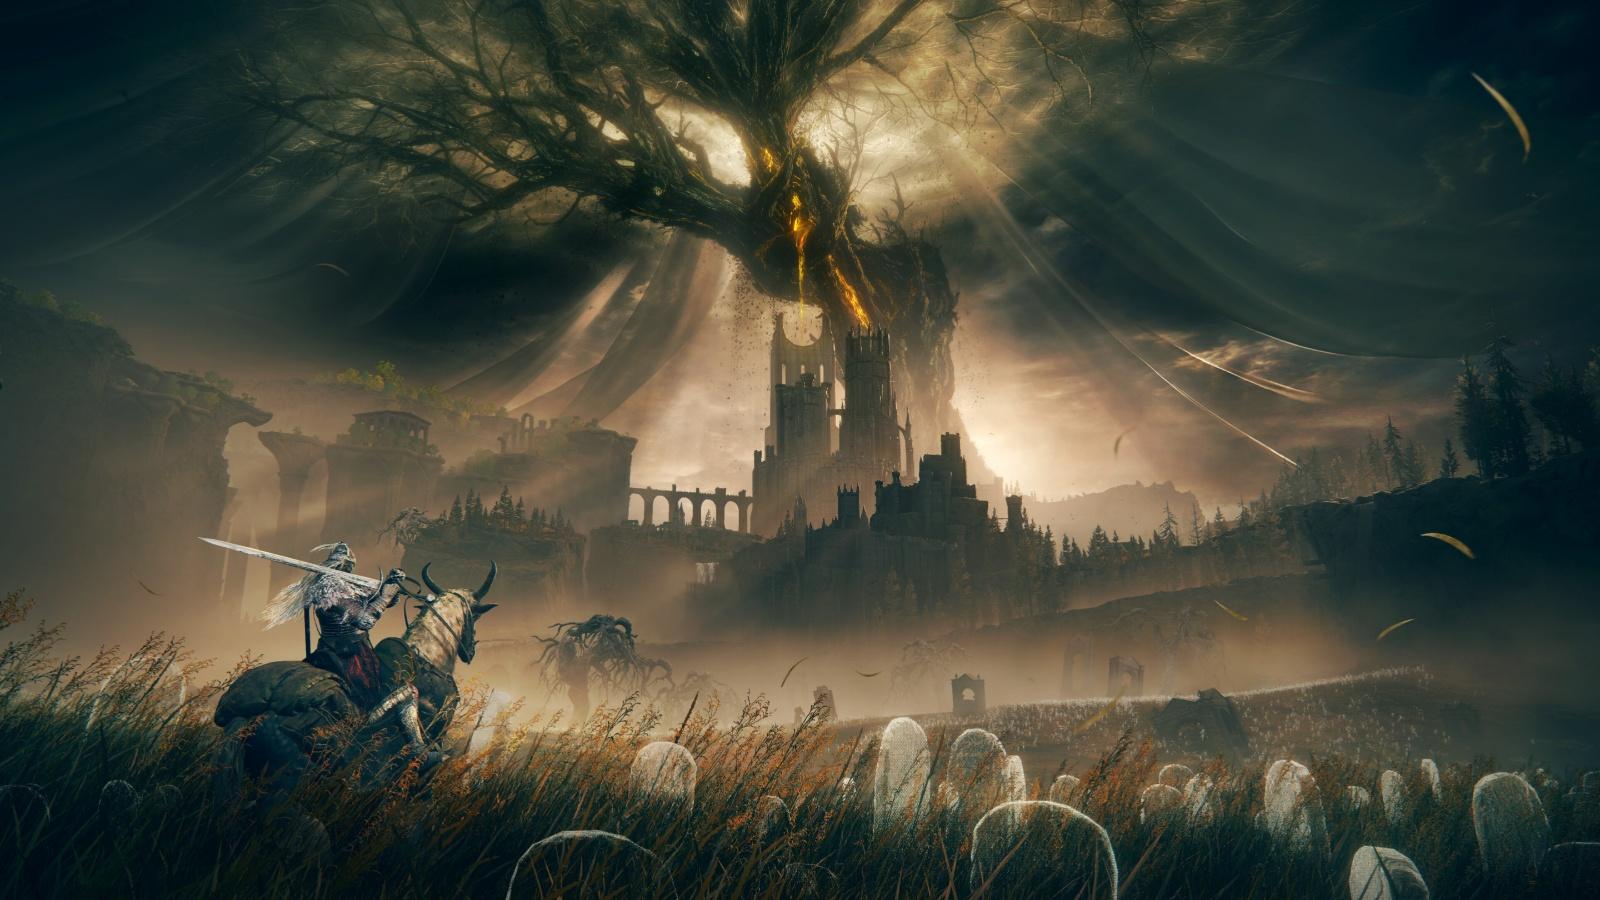 A screenshot from the game Elden Ring Shadow of the Erdtree